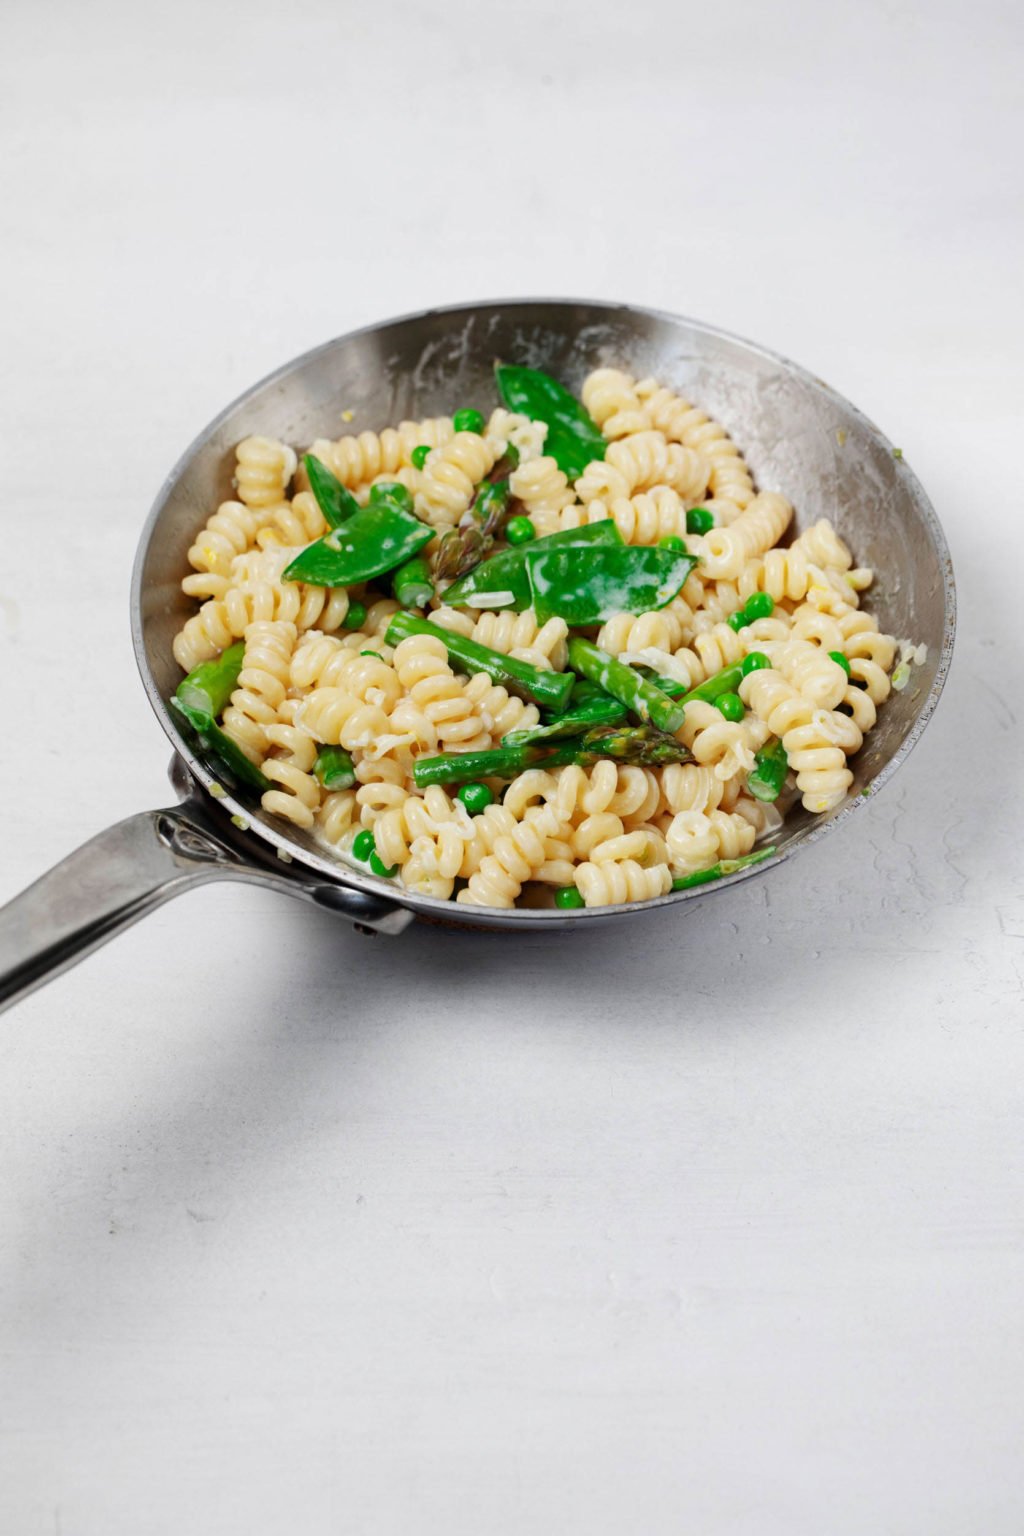 A silver saucepan is filled with pasta and vegetables.